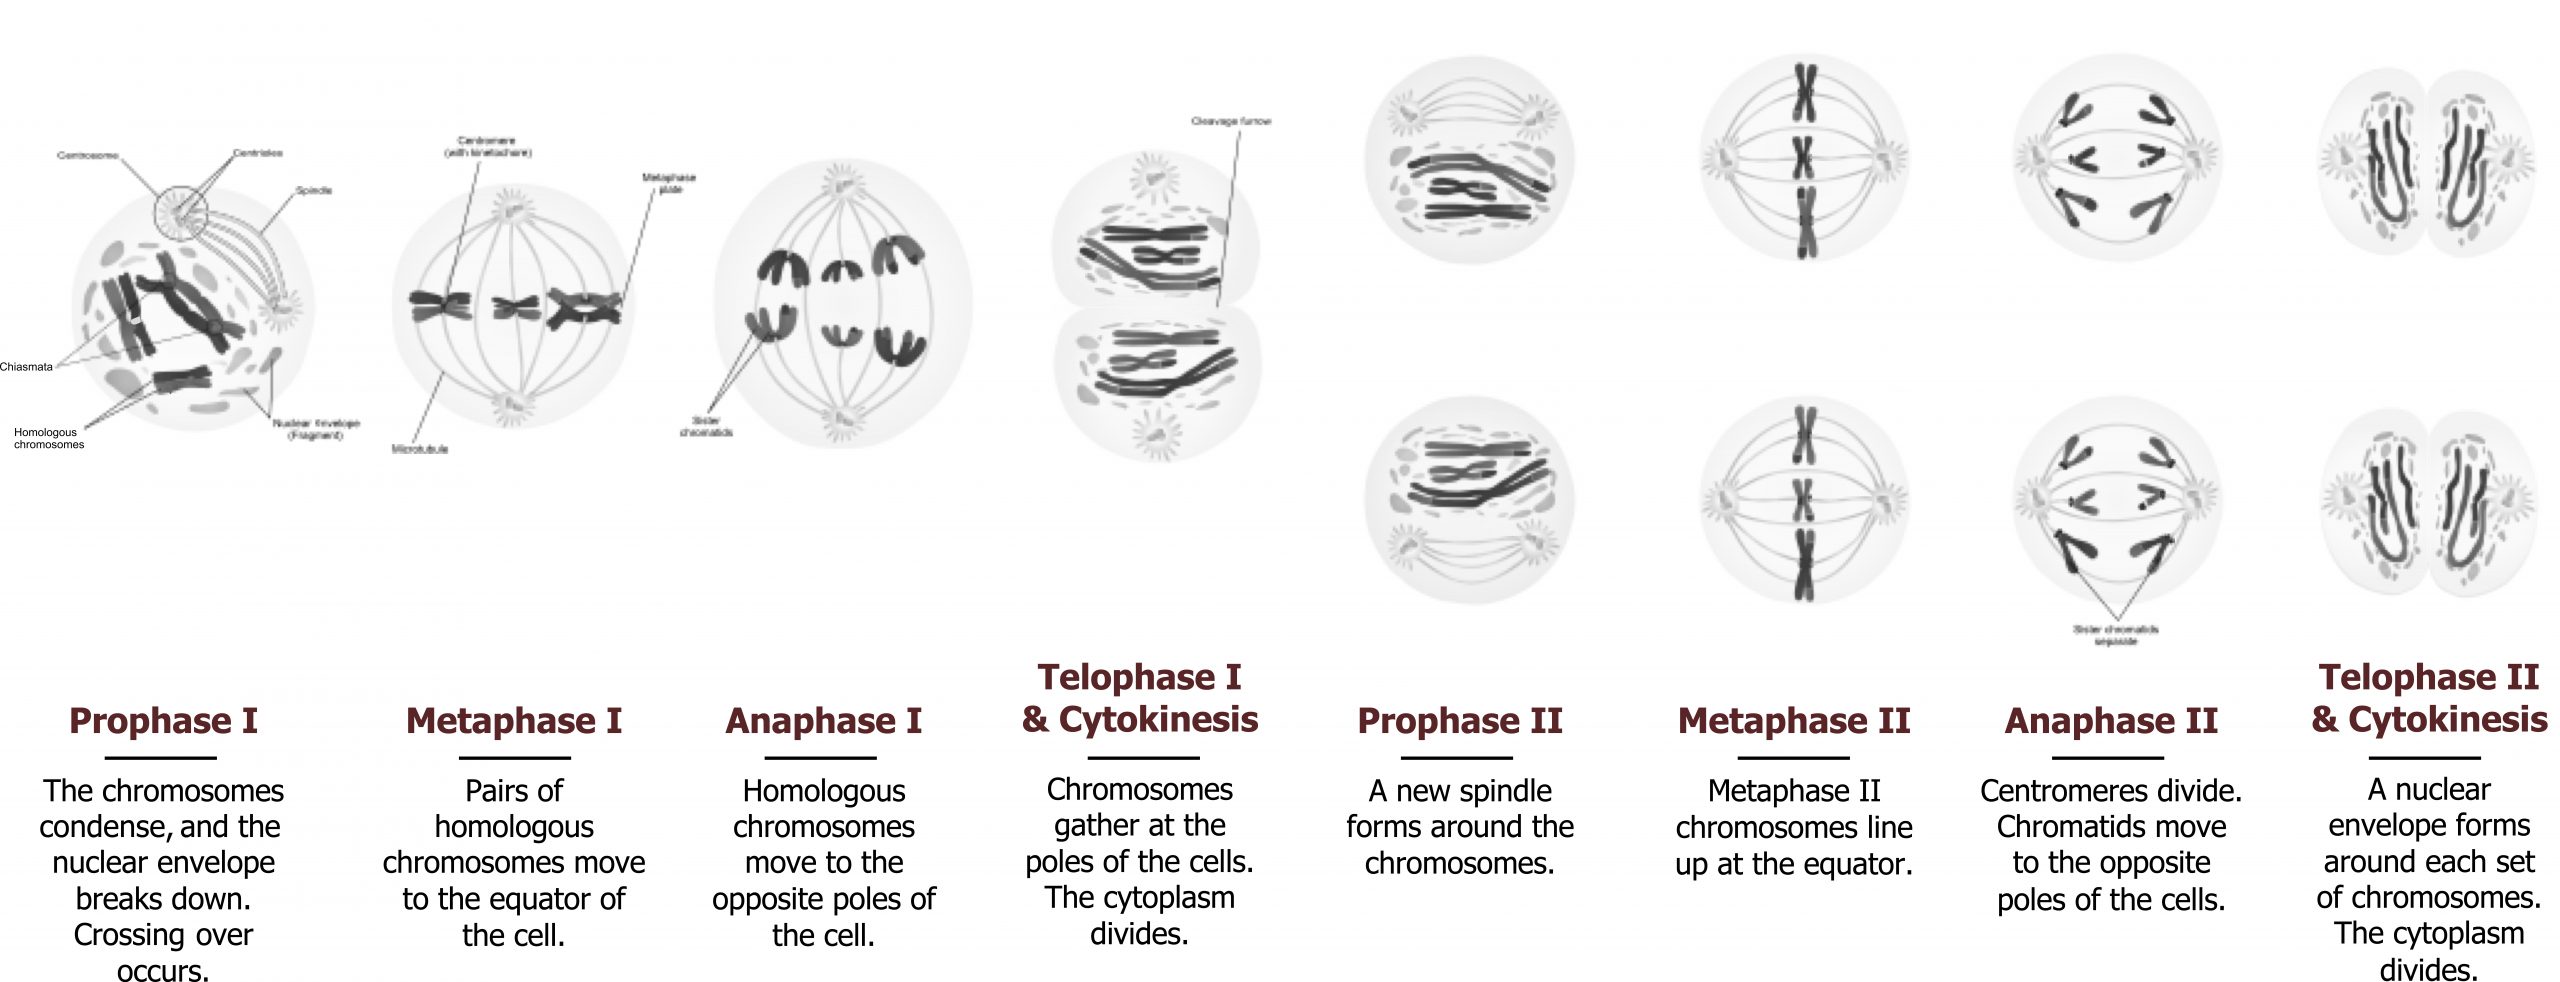 Prophase I: The chromosomes condense, and the nuclear envelope breaks down. Crossing over occurs. Metaphase I: Pairs of homologous chromosomes move to the equator of the cell. Anaphase I: Homologous chromosomes move to the opposite poles of the cell. Telophase I & Cytokinesis: Chromosomes gather at the poles of the cells. The cytoplasm divides. Prophase II: A new spindle forms around the chromosomes. Metaphase II: Chromosomes line up at the equator. Anaphase II: Centromeres divide. Chromatids move to the opposite poles of the cells. Telophase II & Cytokinesis: A nuclear envelope forms around each set of chromosomes. The cytoplasm divides.